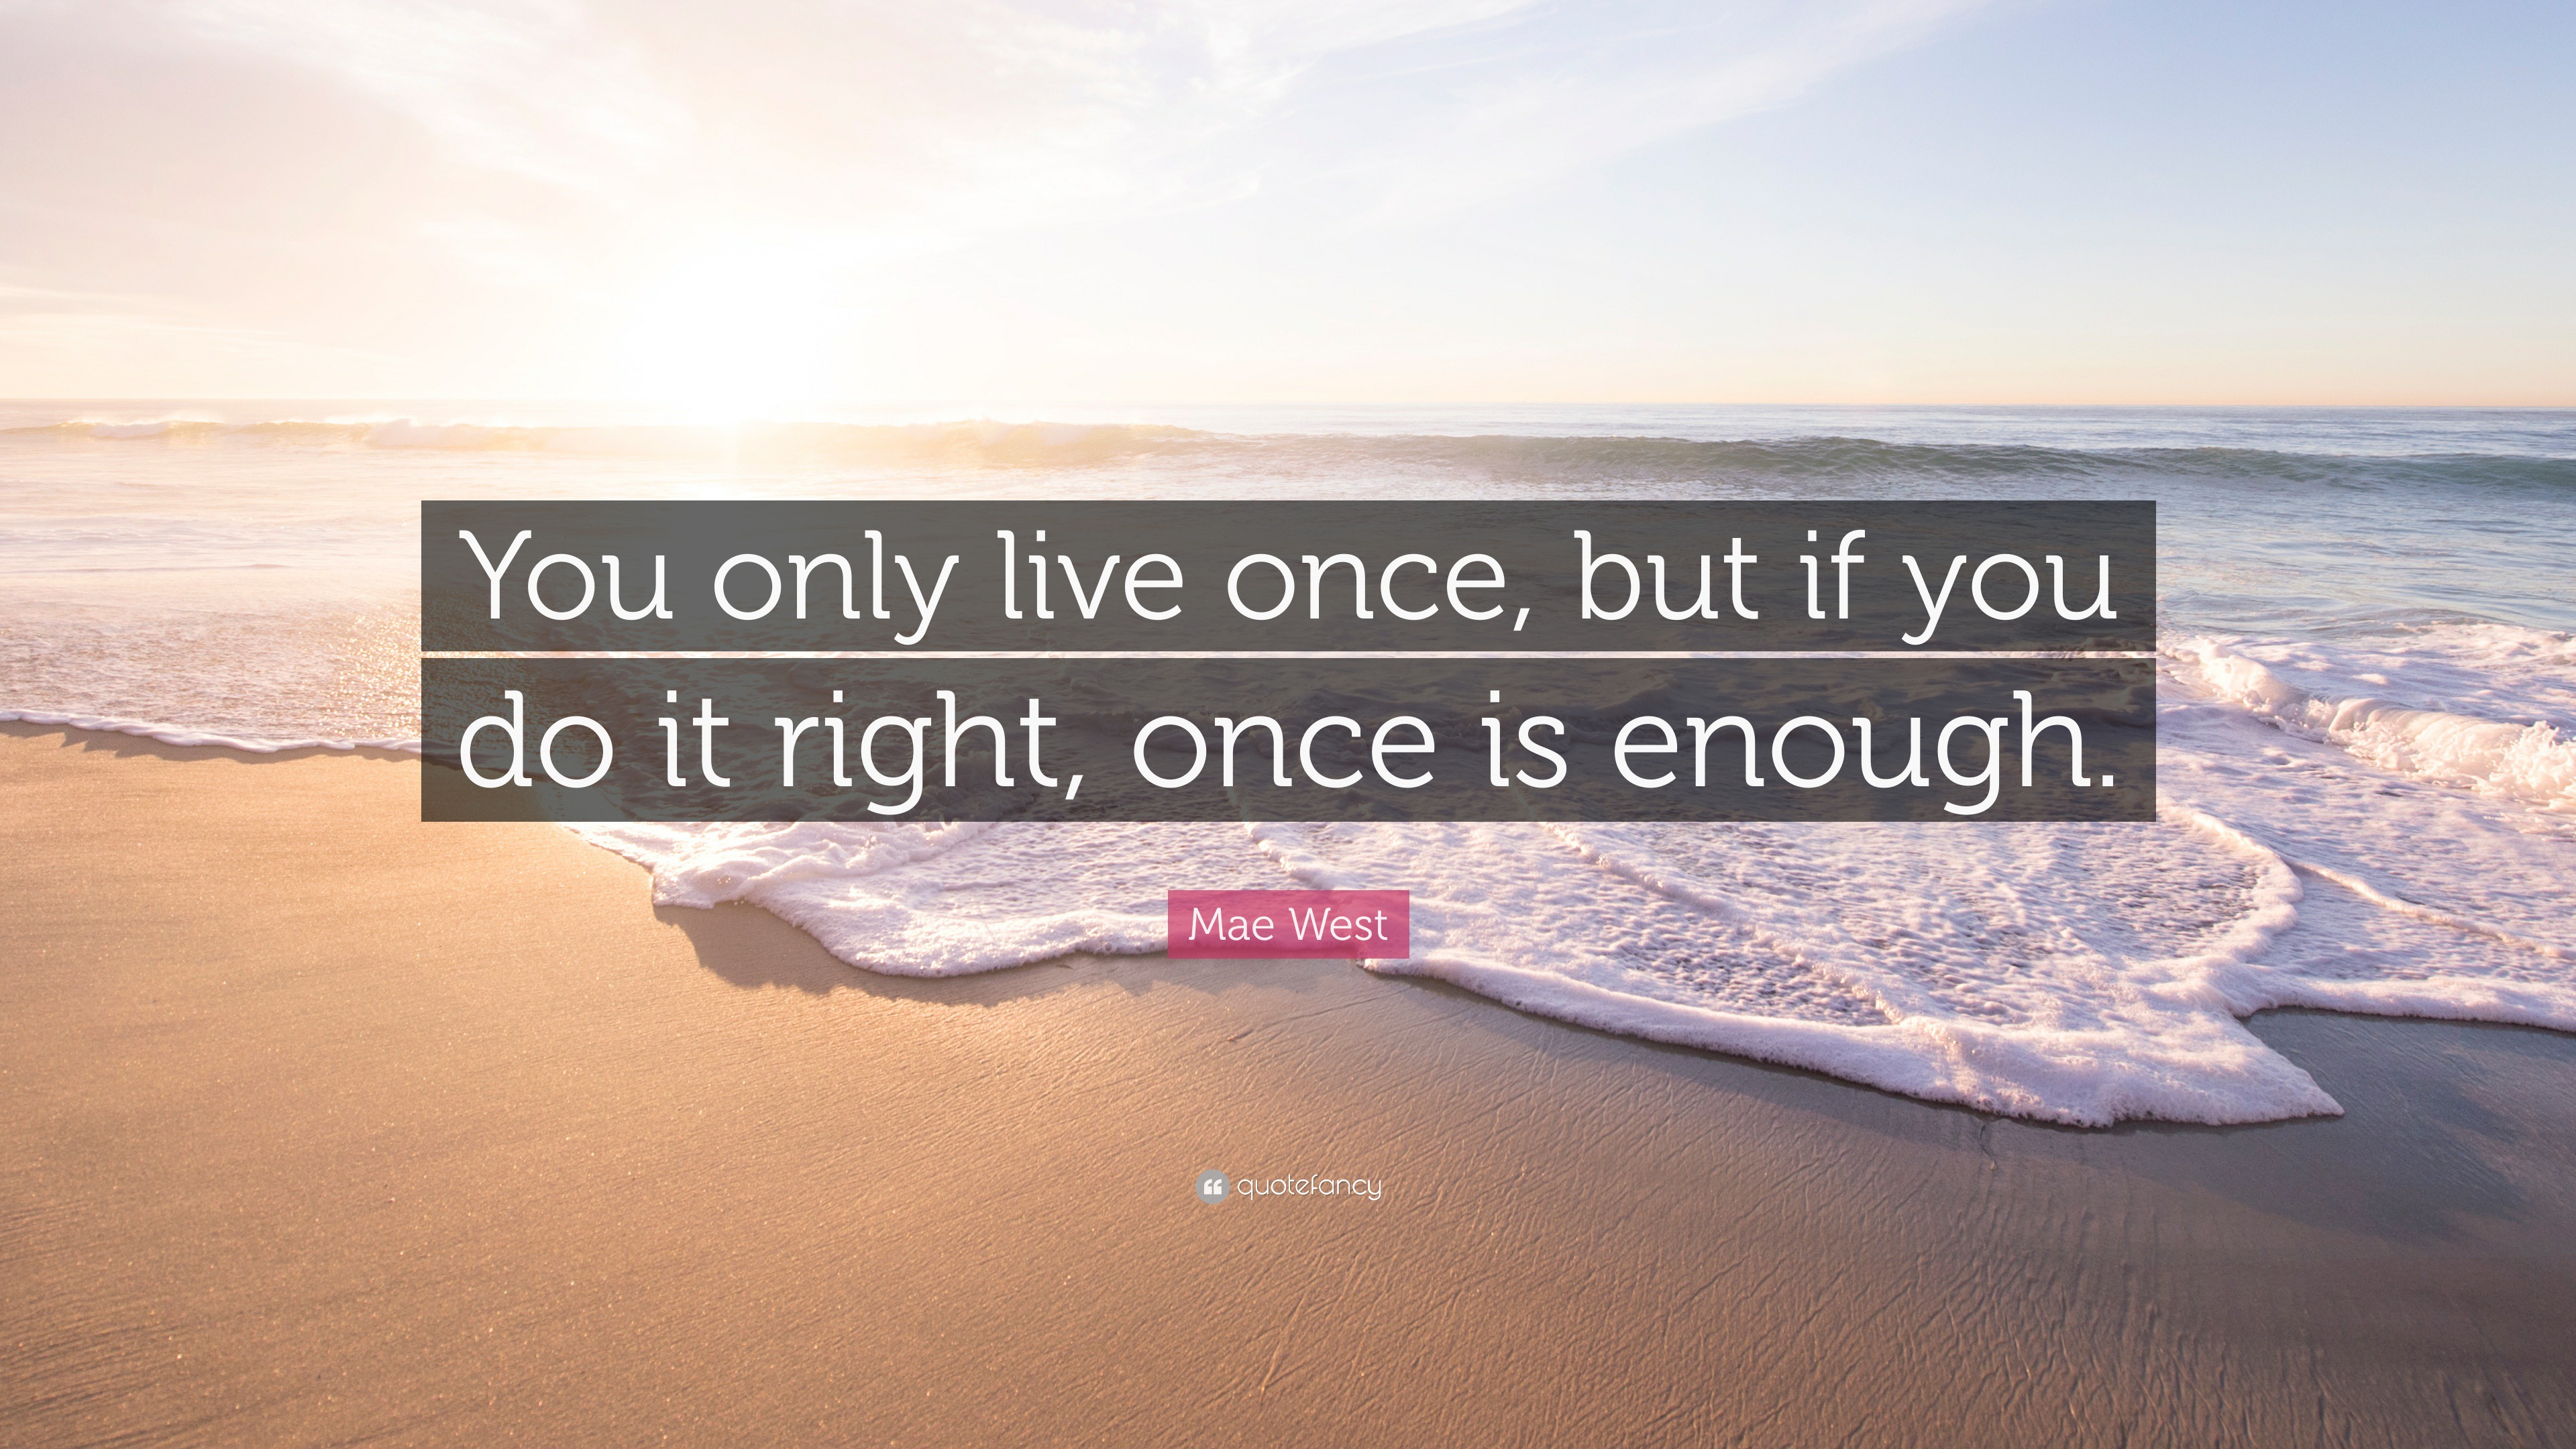 You Only Live Once - Make It COUNT!